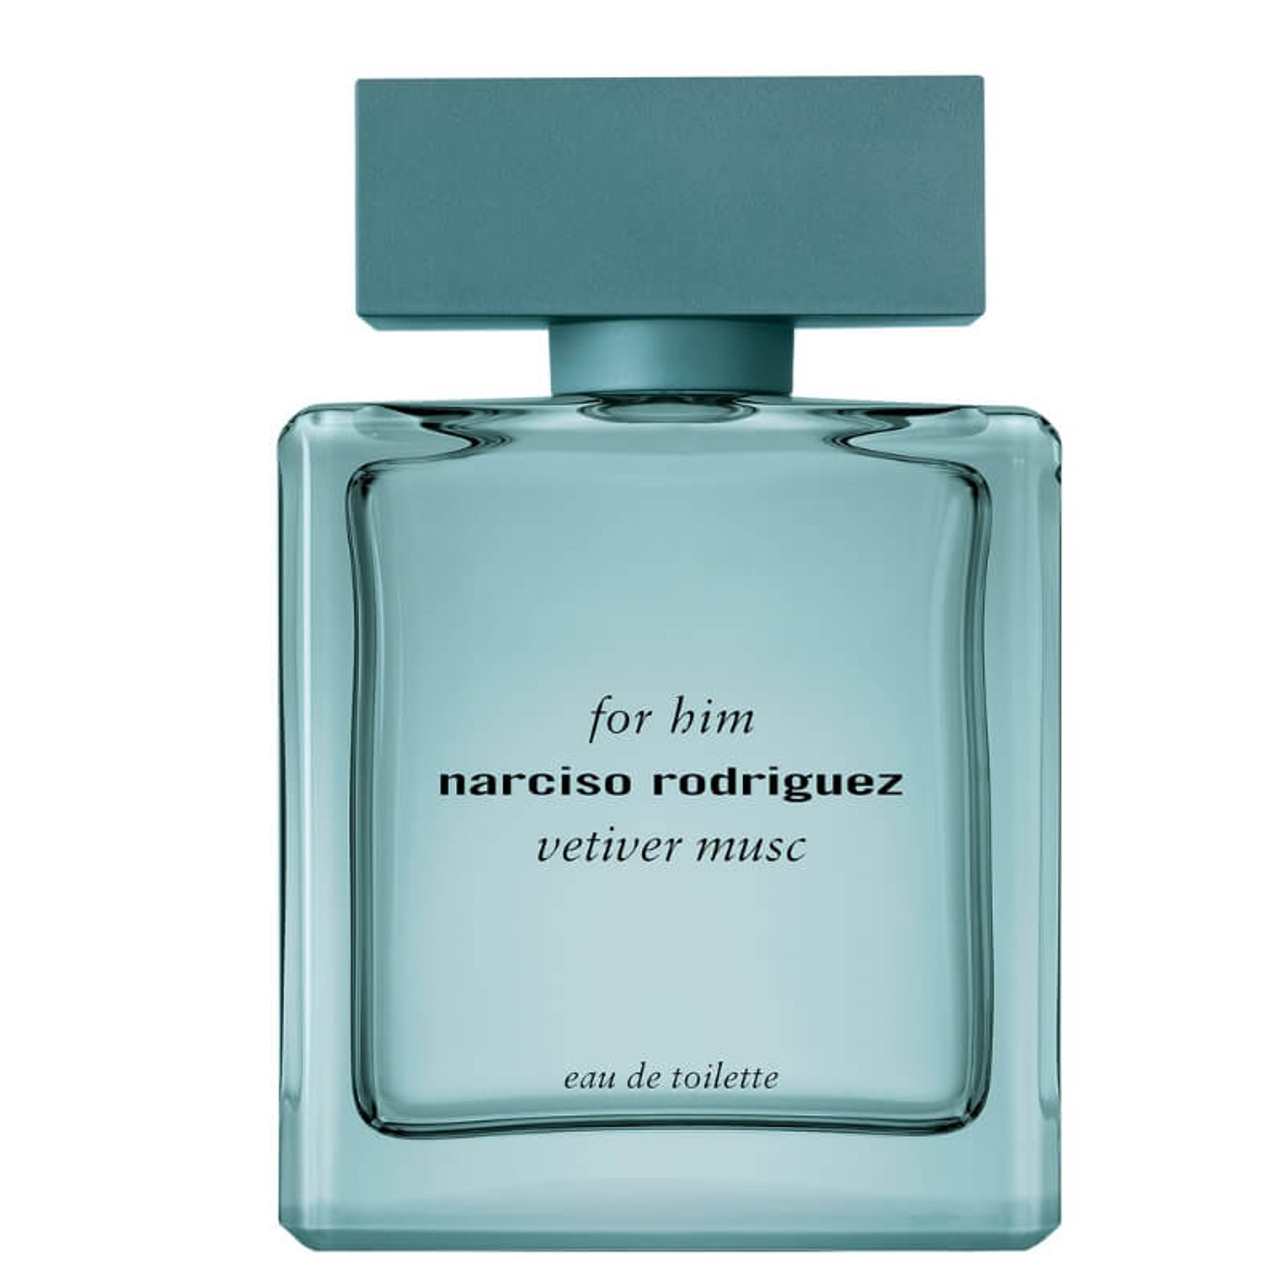 For Her by Narciso Rodriguez (Eau de Toilette) » Reviews & Perfume